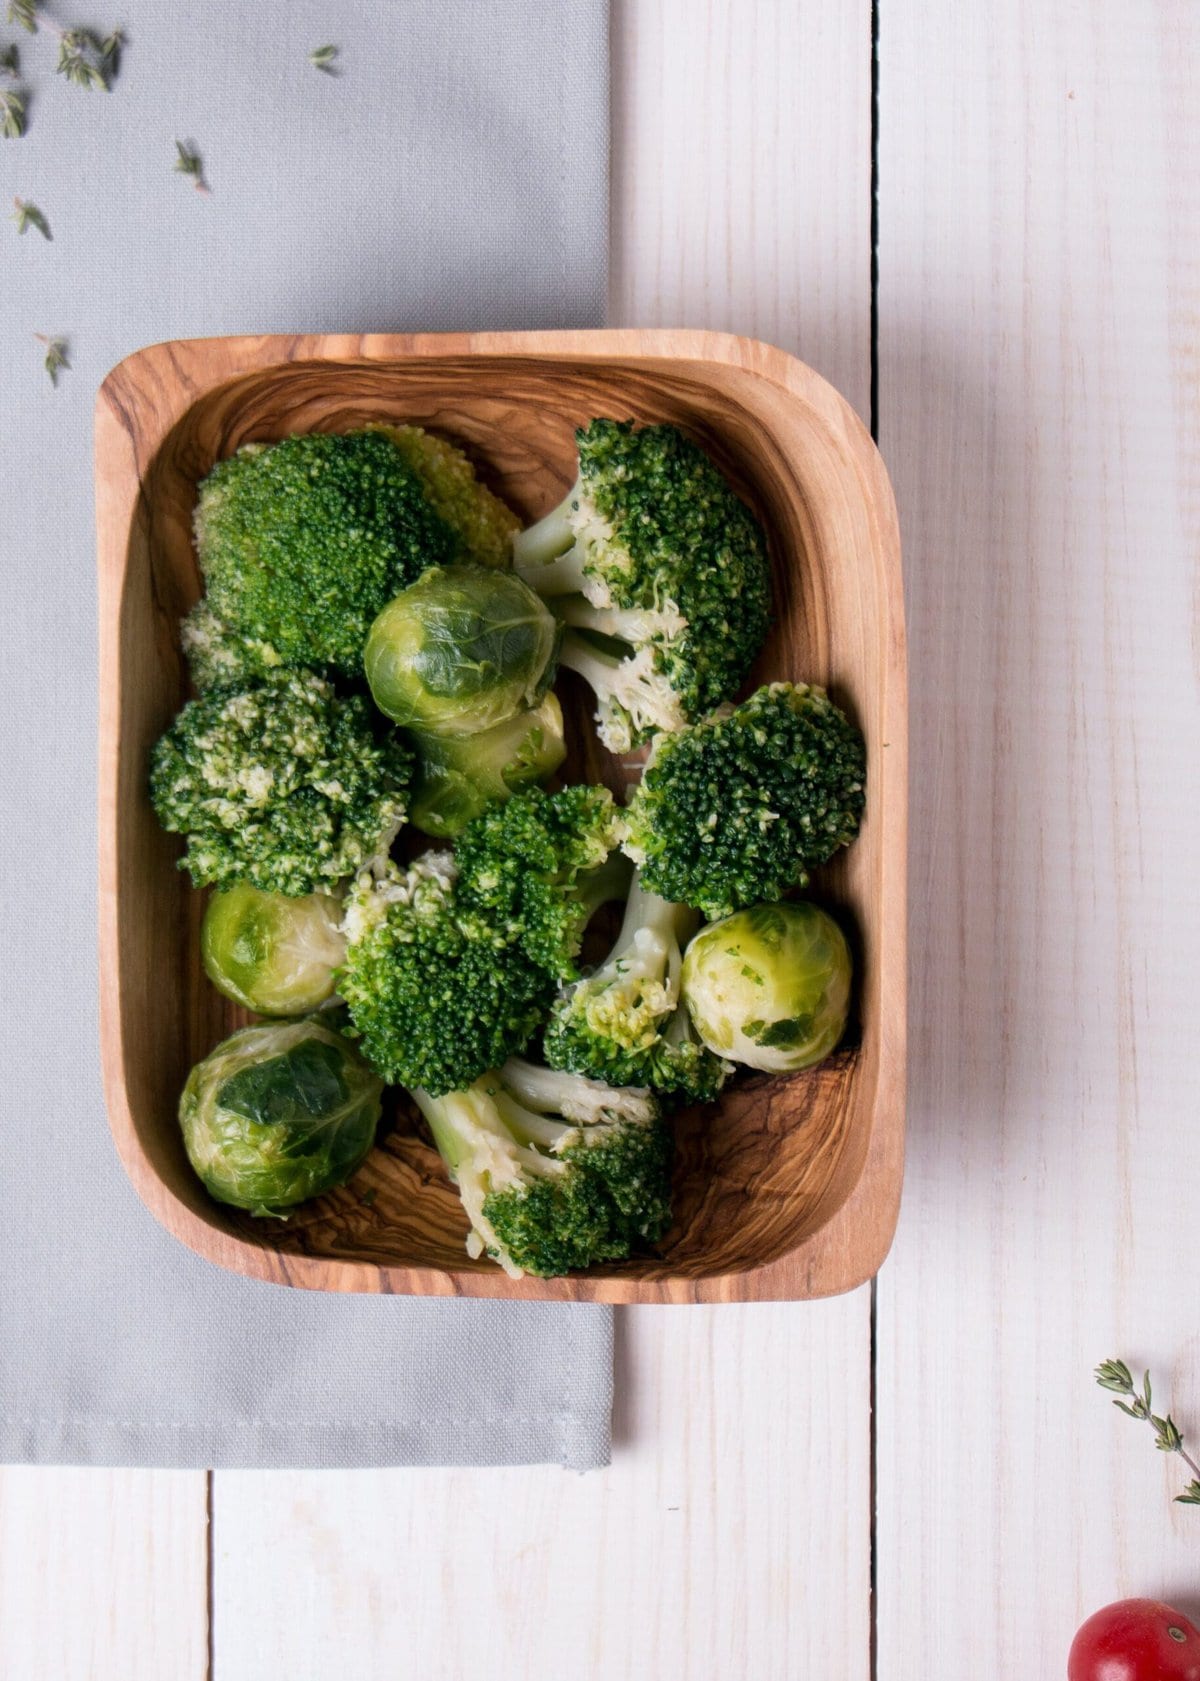 Broccoli and brussels sprouts in a wooden bowl.